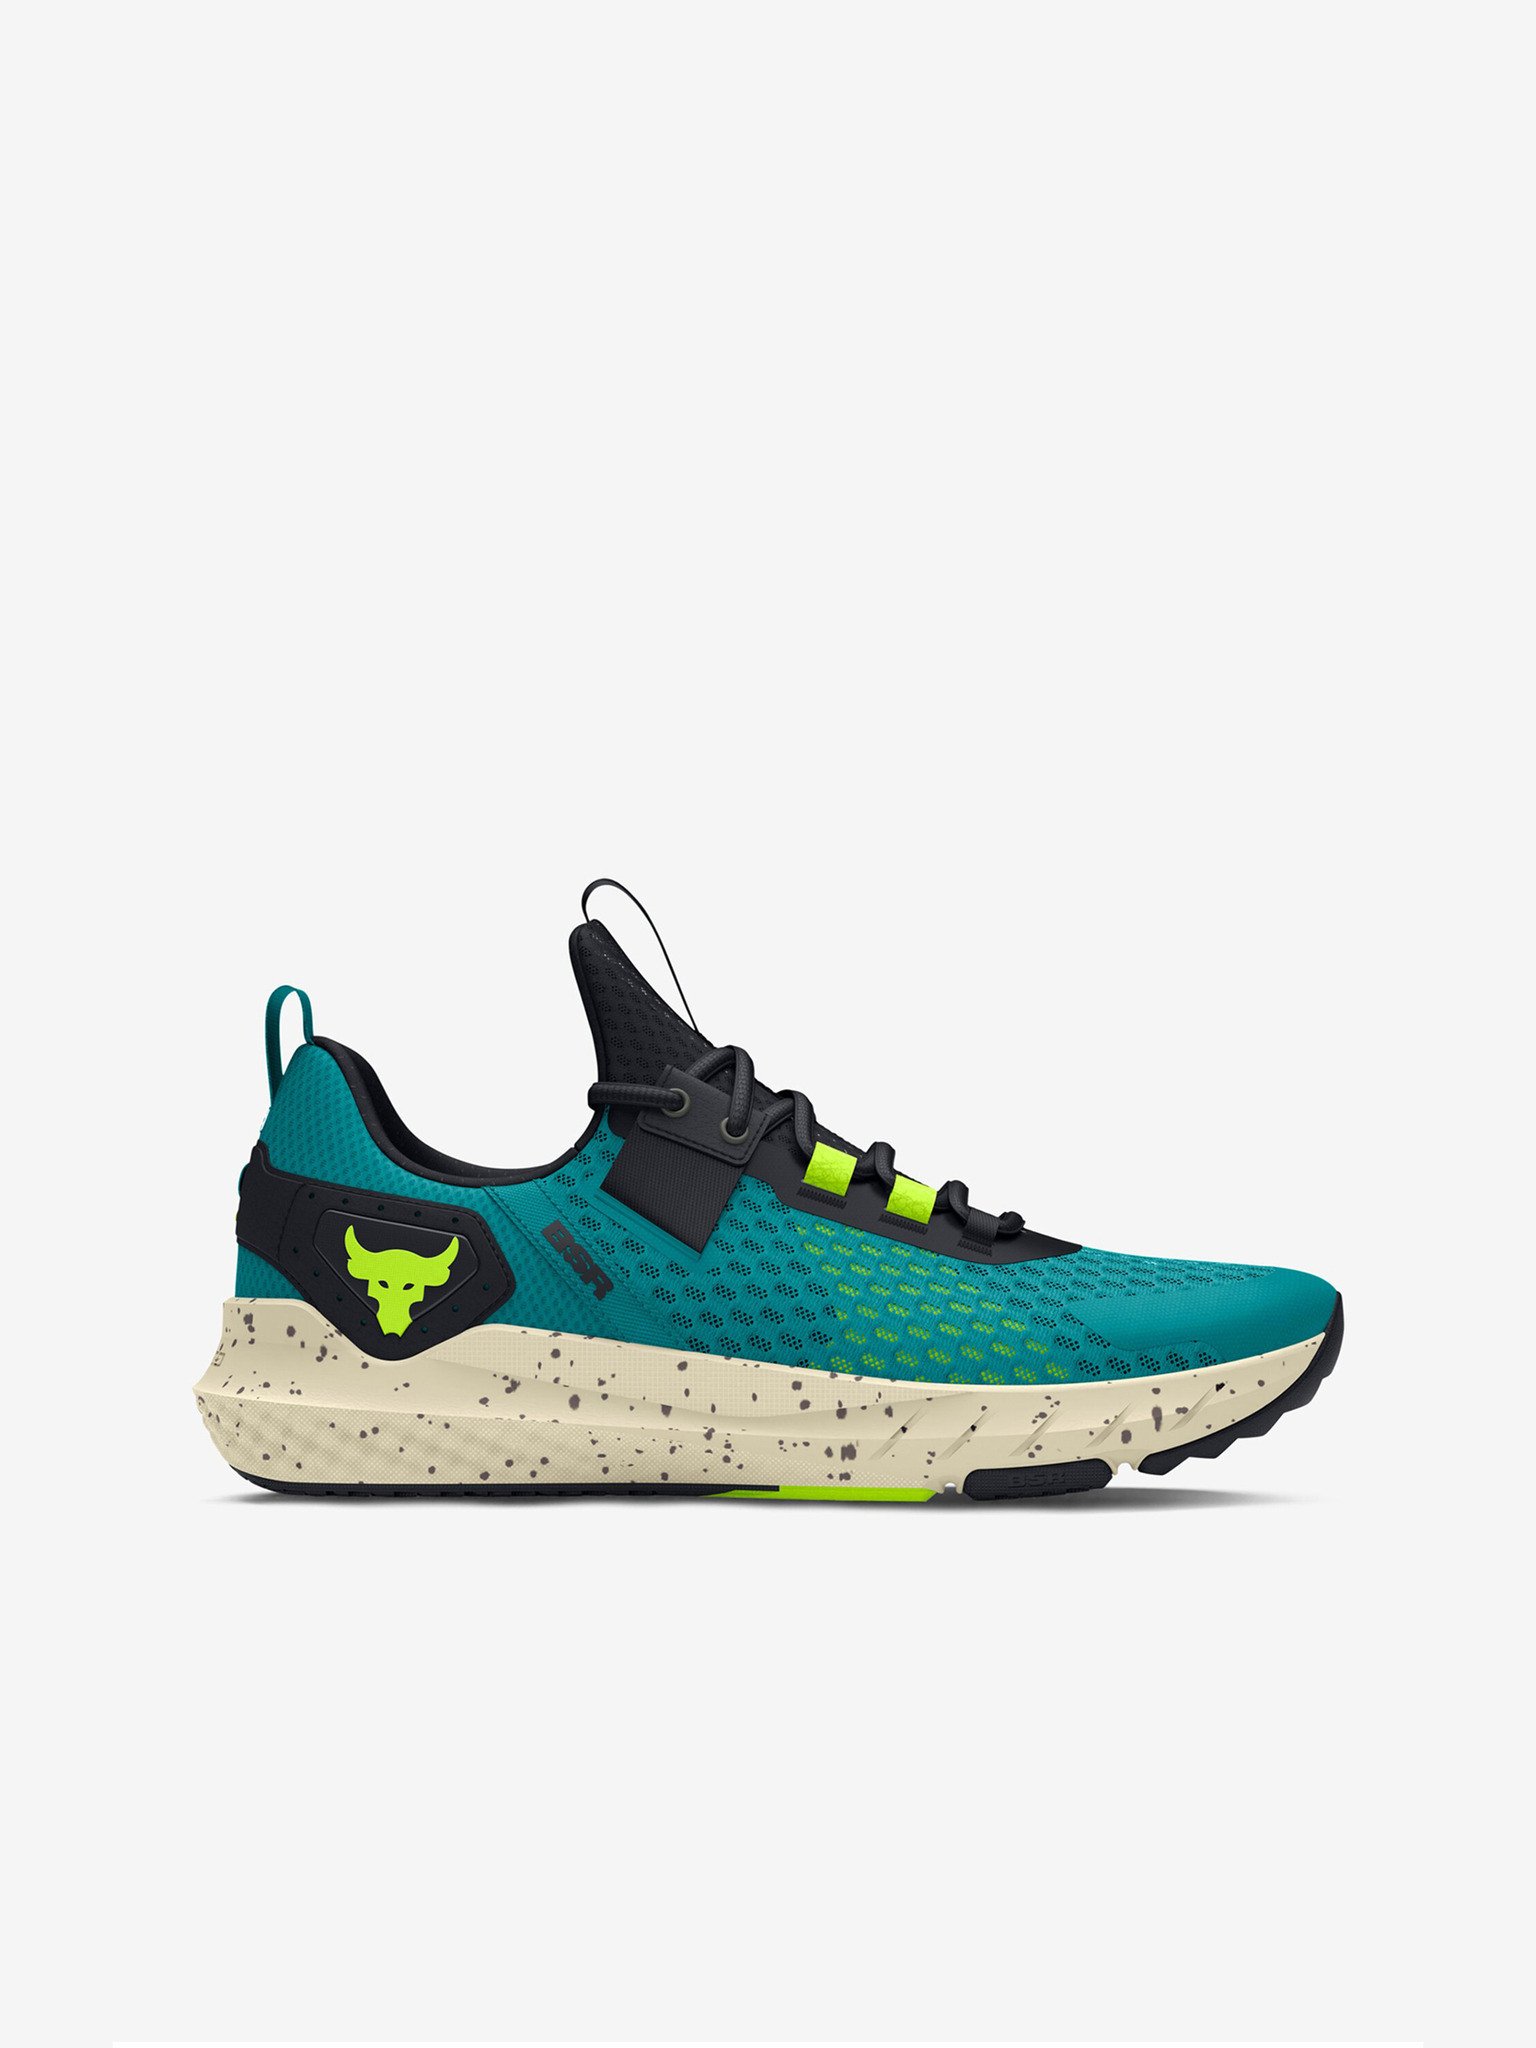 Under Armour - UA Project Rock BSR 4 Sneakers